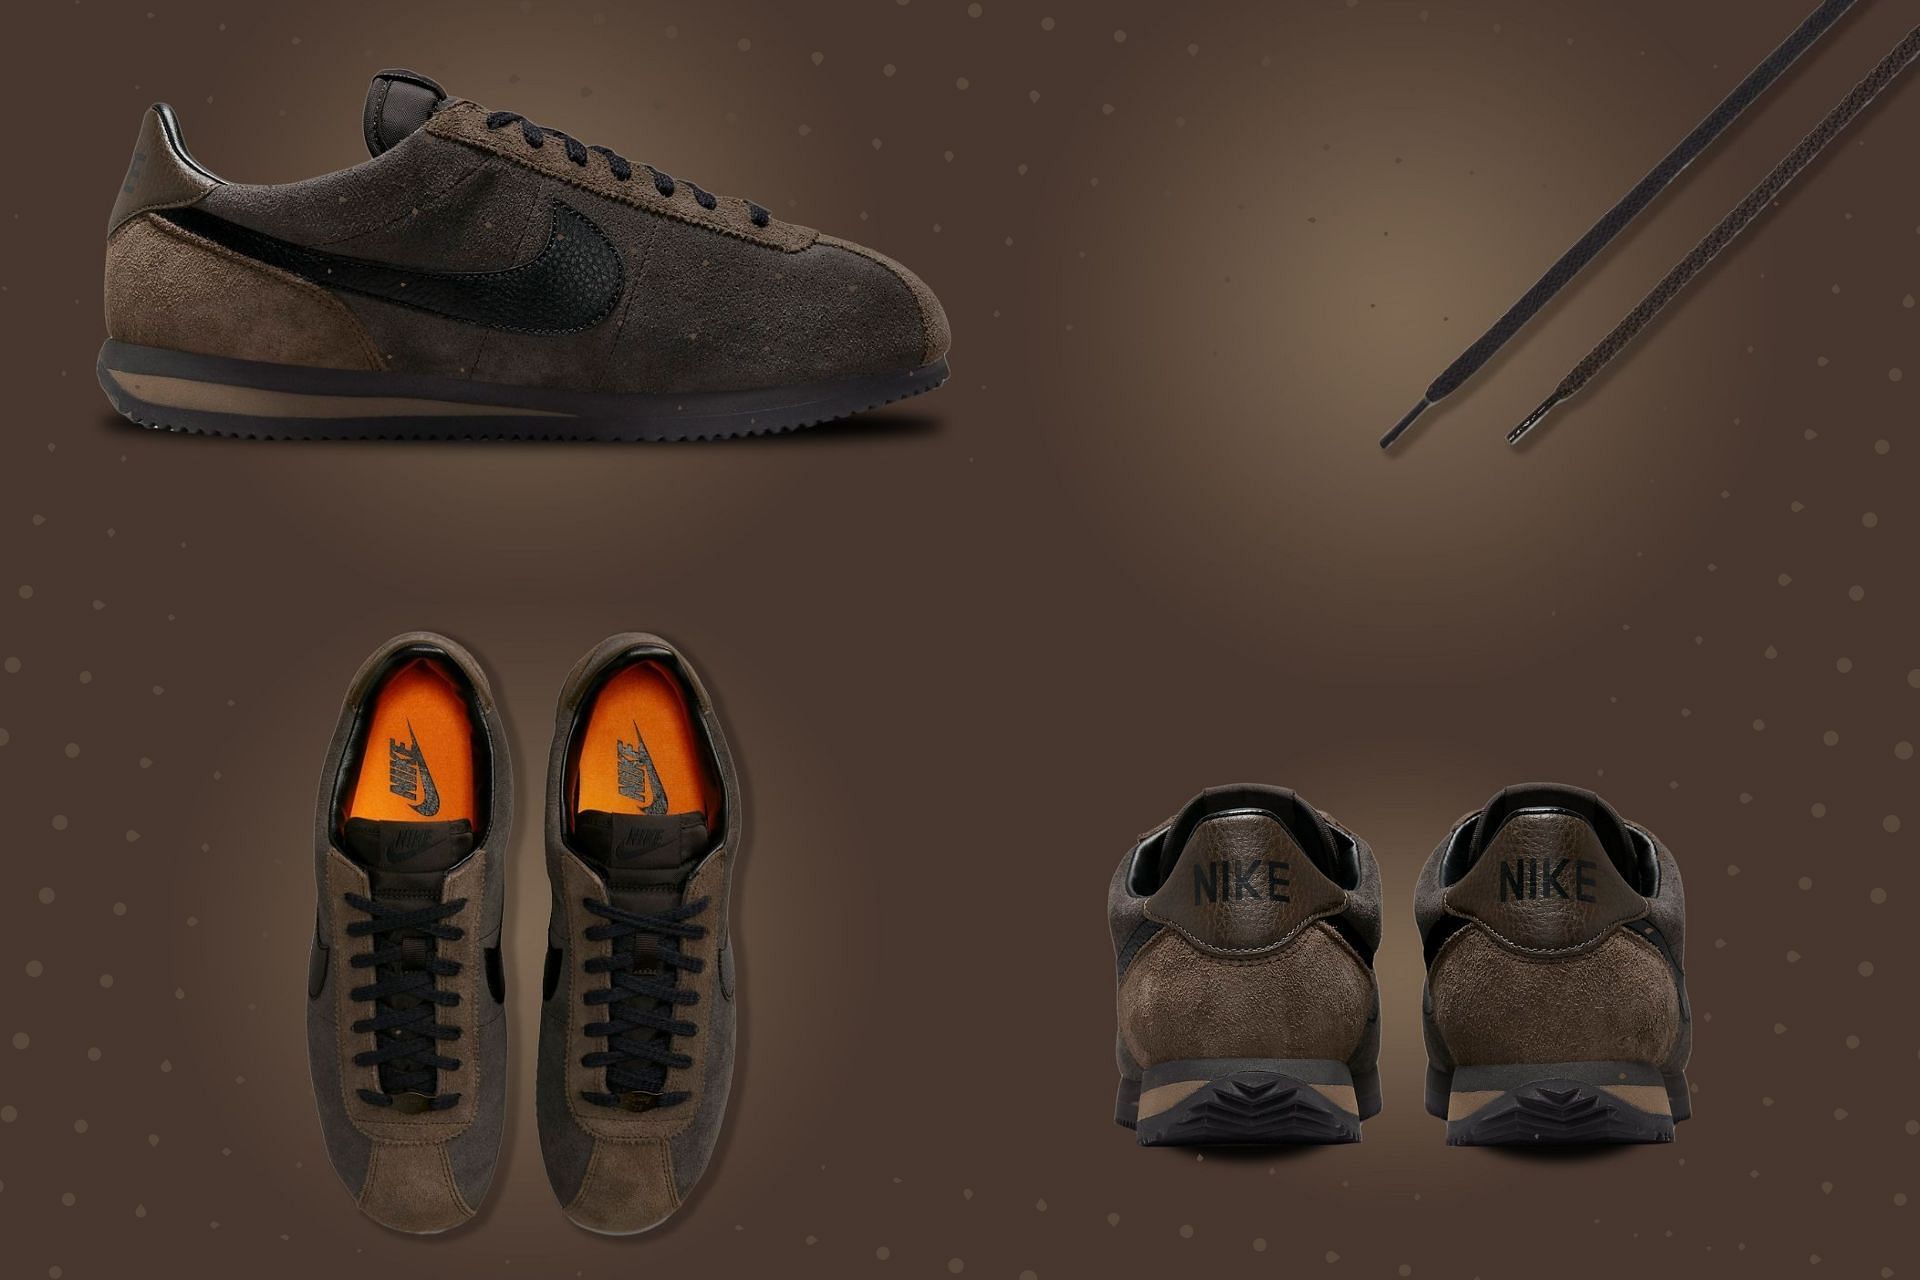 A detailed look at the upcoming Nike Cortez Velvet Brown shoes (Image via Sportskeeda)